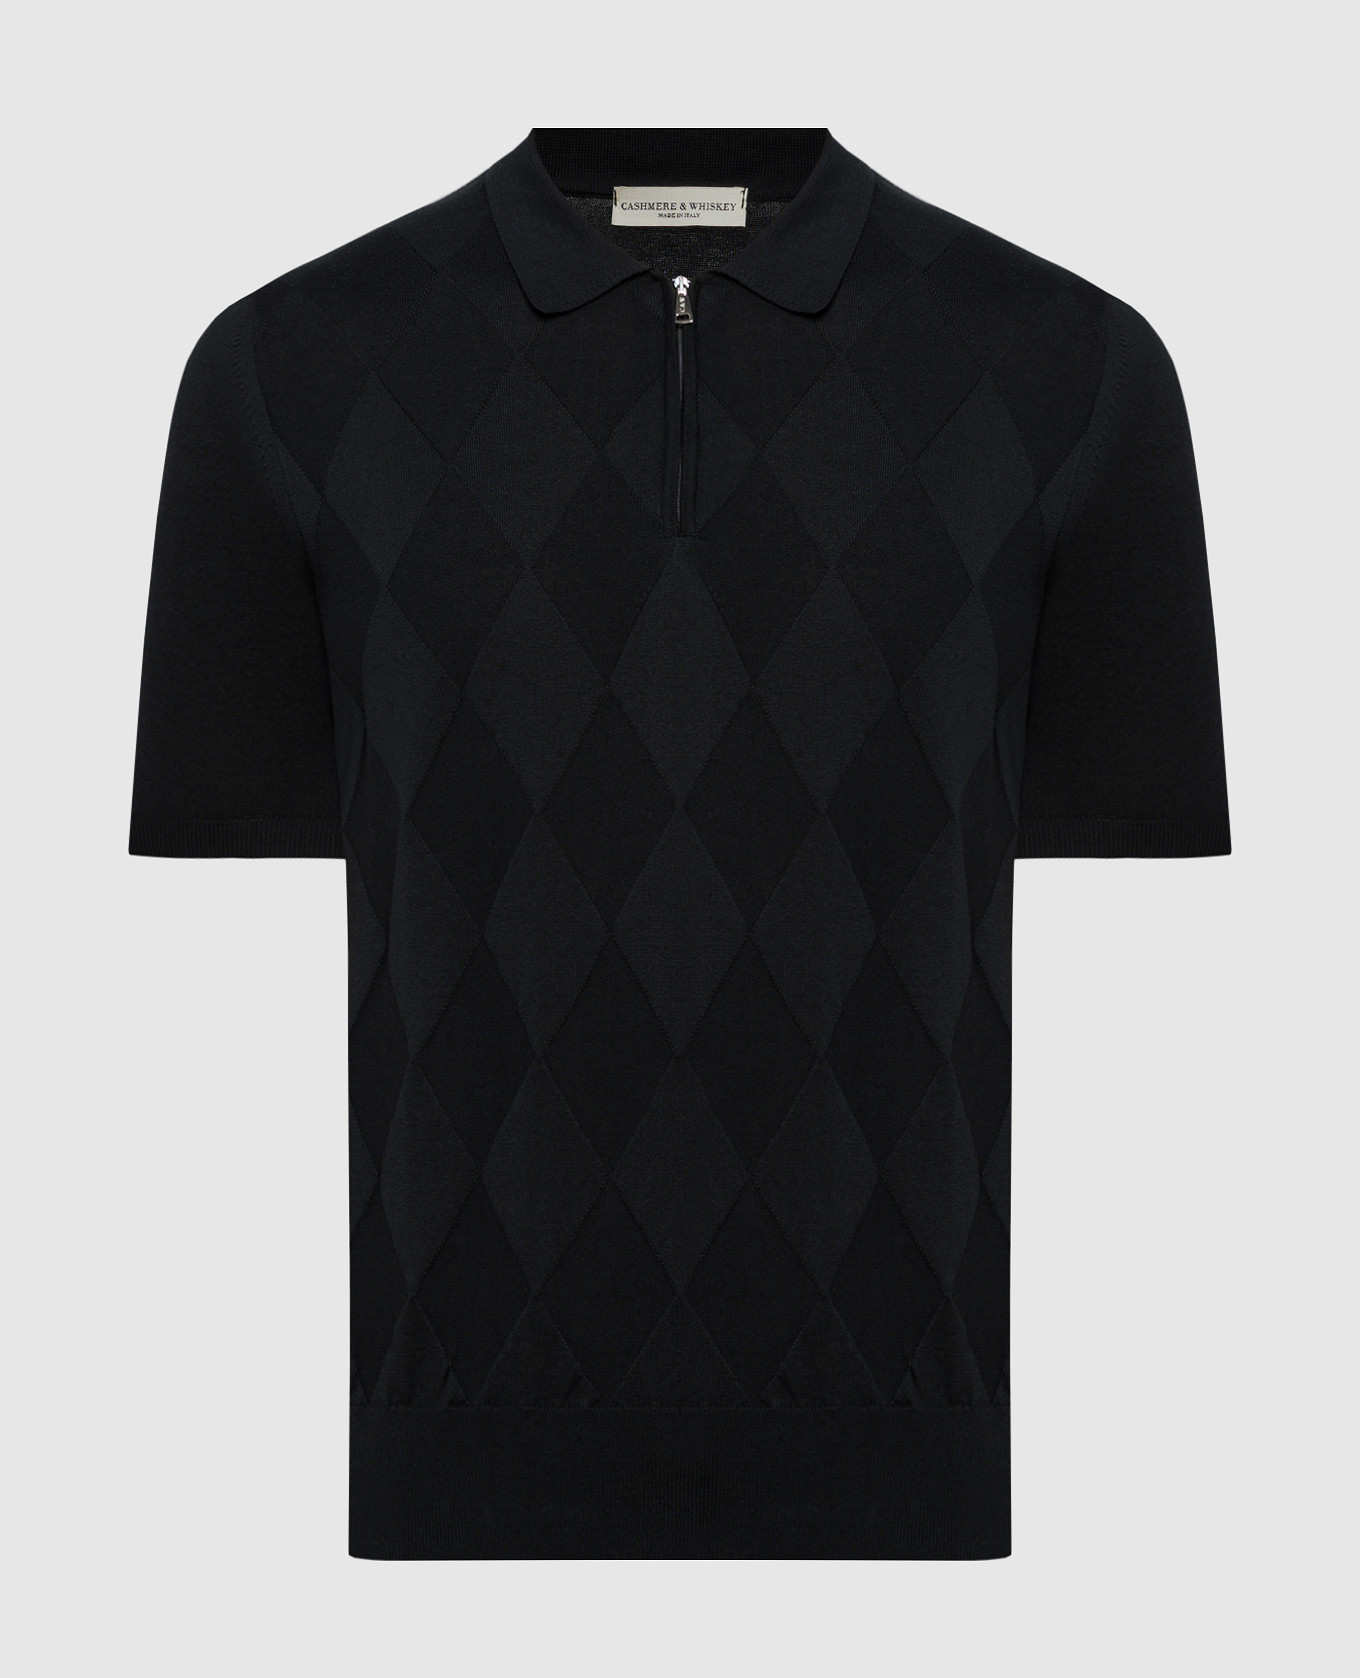 Black silk and cashmere polo with a textured pattern